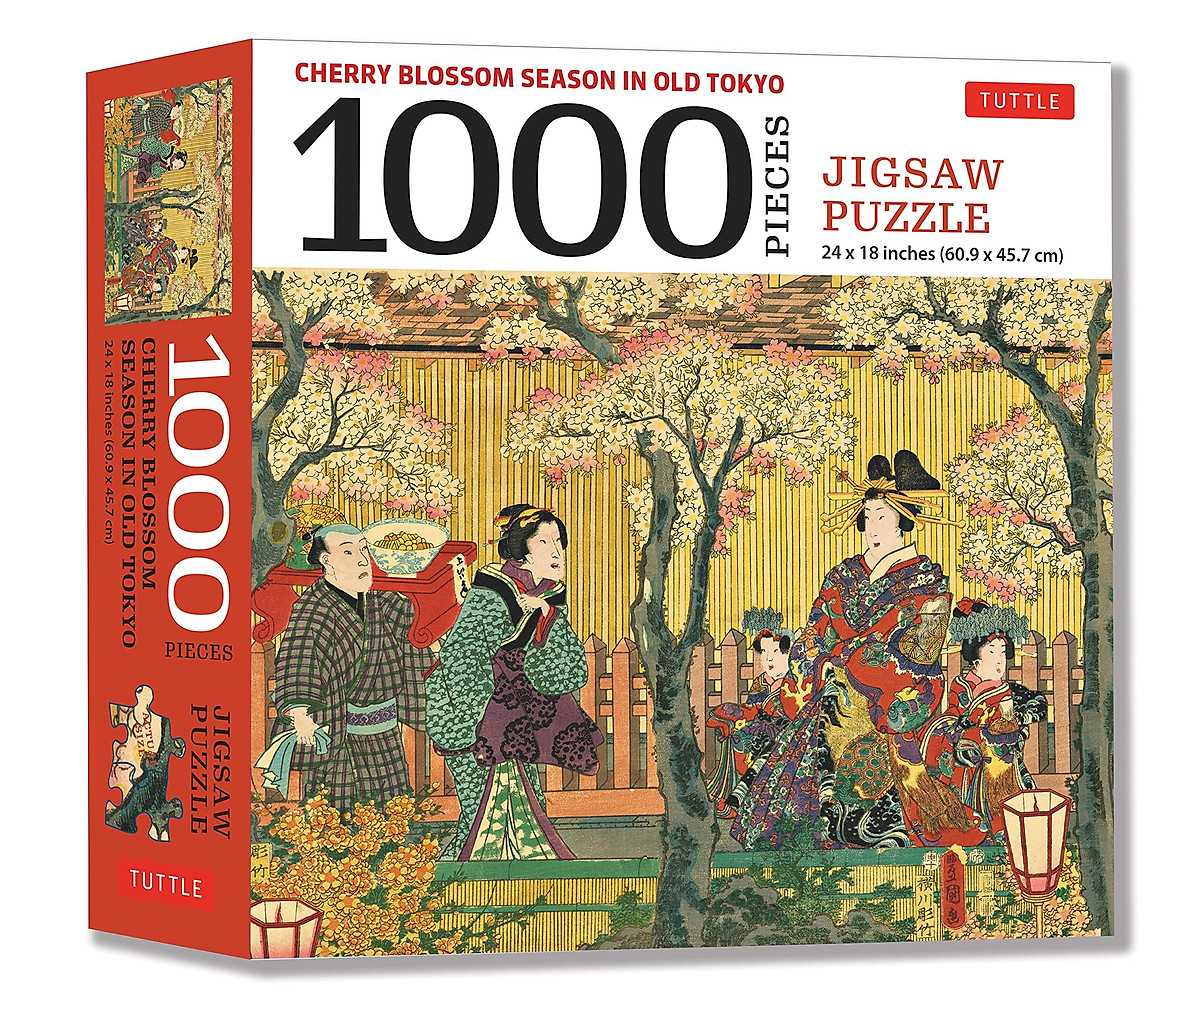 Cherry Blossom Season In Old Tokyo- 1000 Piece Jigsaw Puzzle: Woodblock Print By Utagawa Kunisada (Finished Size 24 in x 18 in)